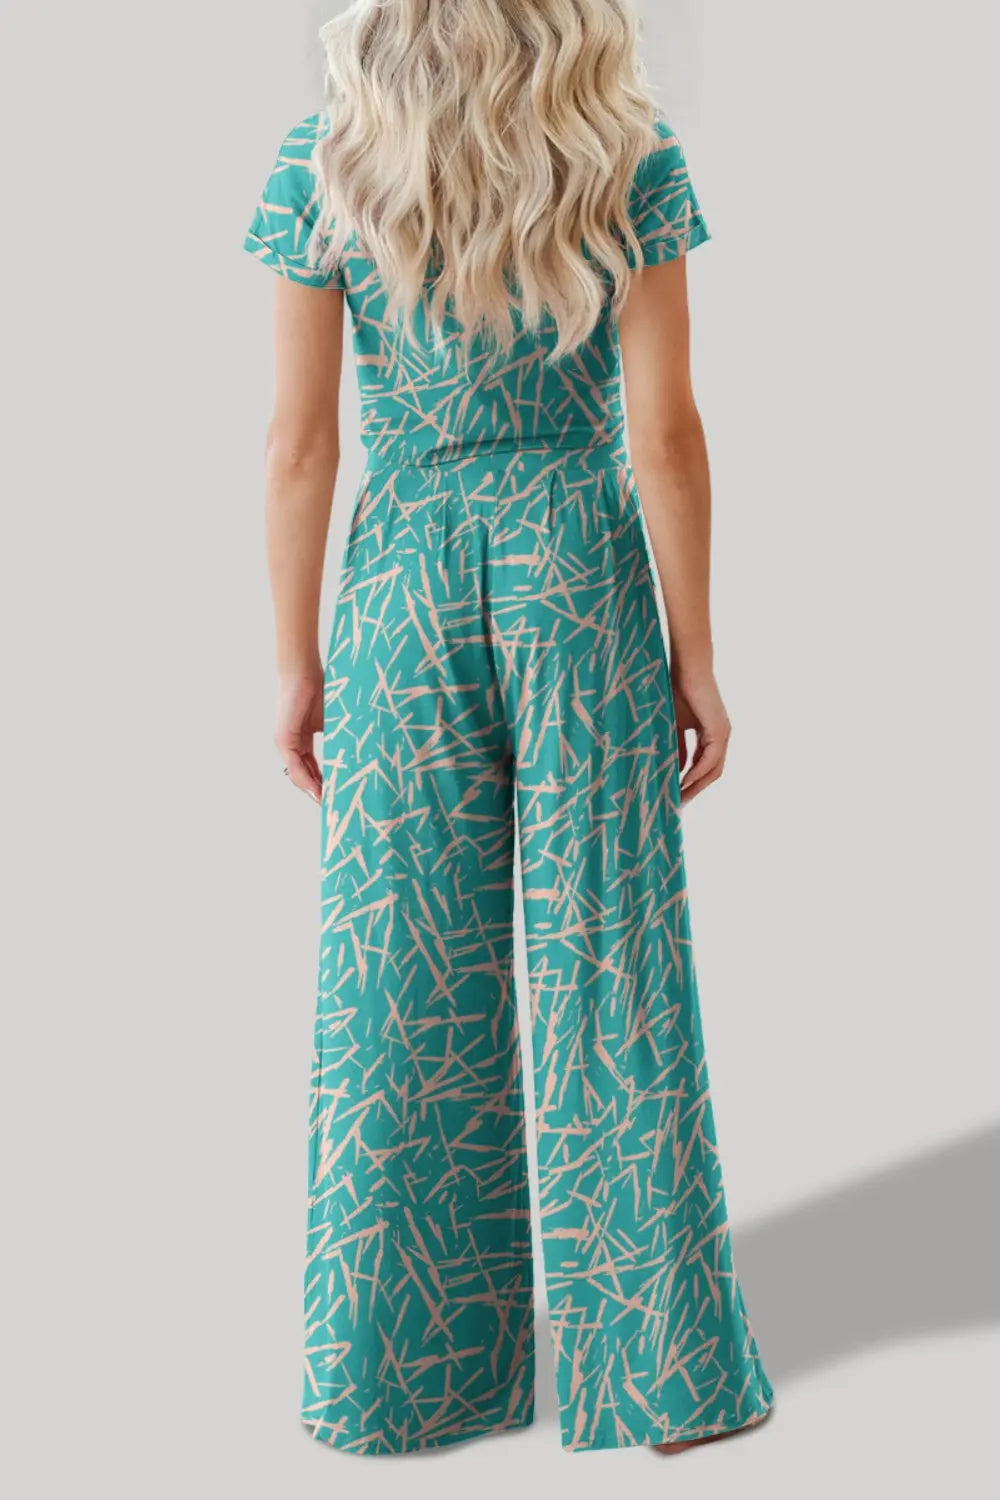 Printed Round Neck Short Sleeve Top and Pants Set Trendsi